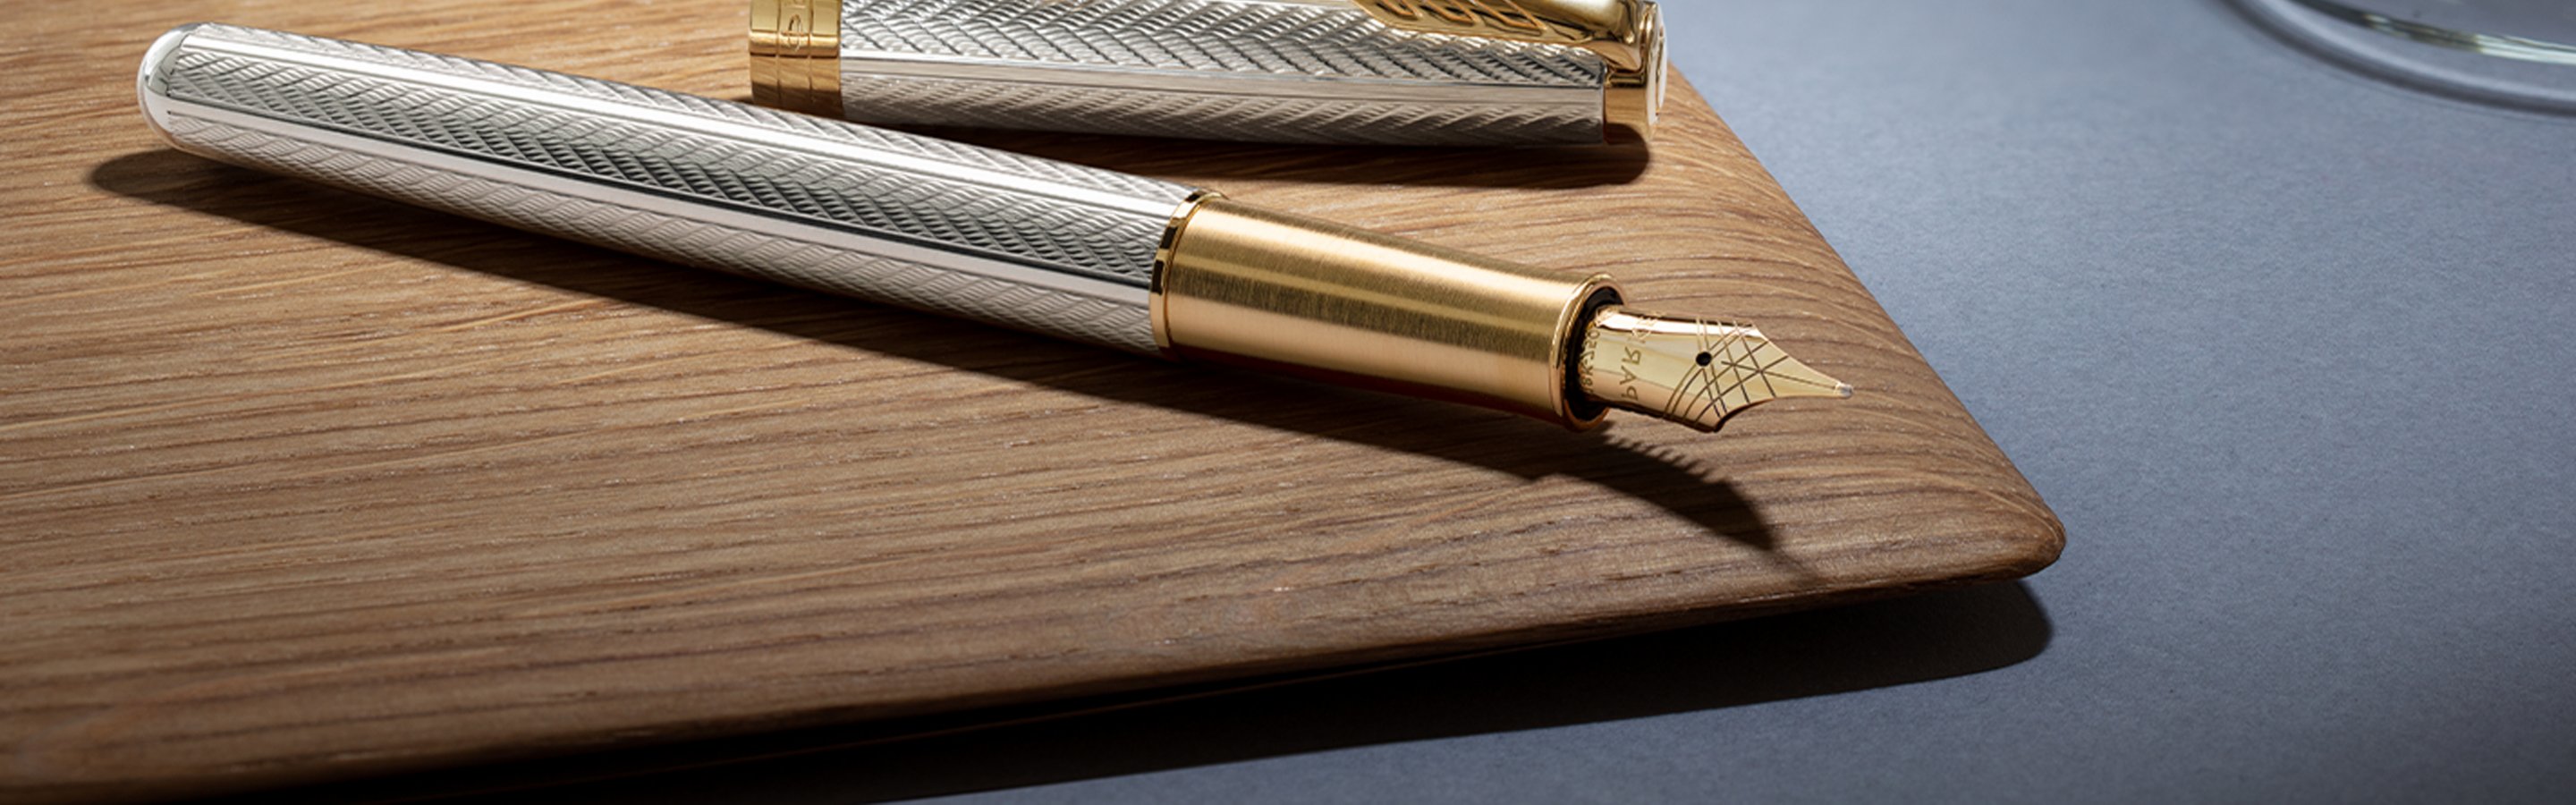 A Sonnet silver mistral fountain pen laid on a wooden board.